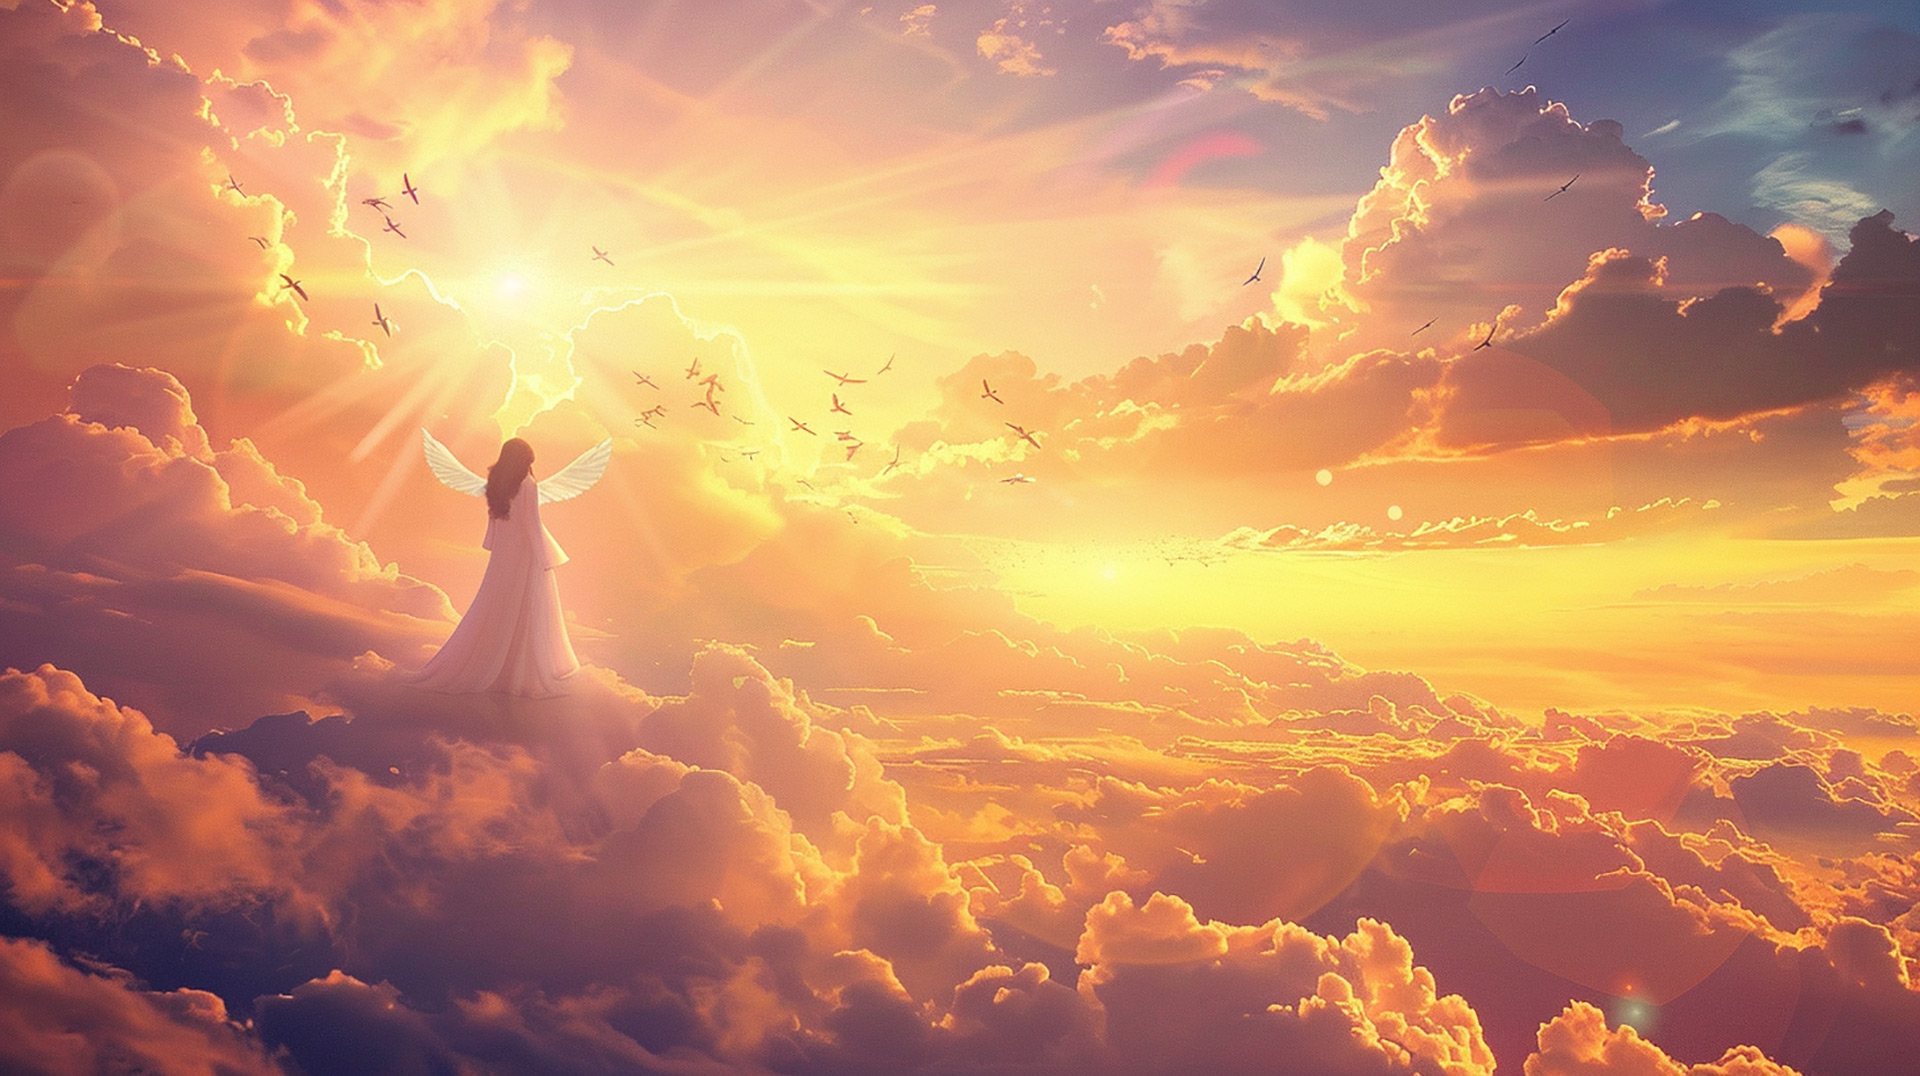 Divine Embrace: AI Wallpaper Reflecting the Unconditional Love of God